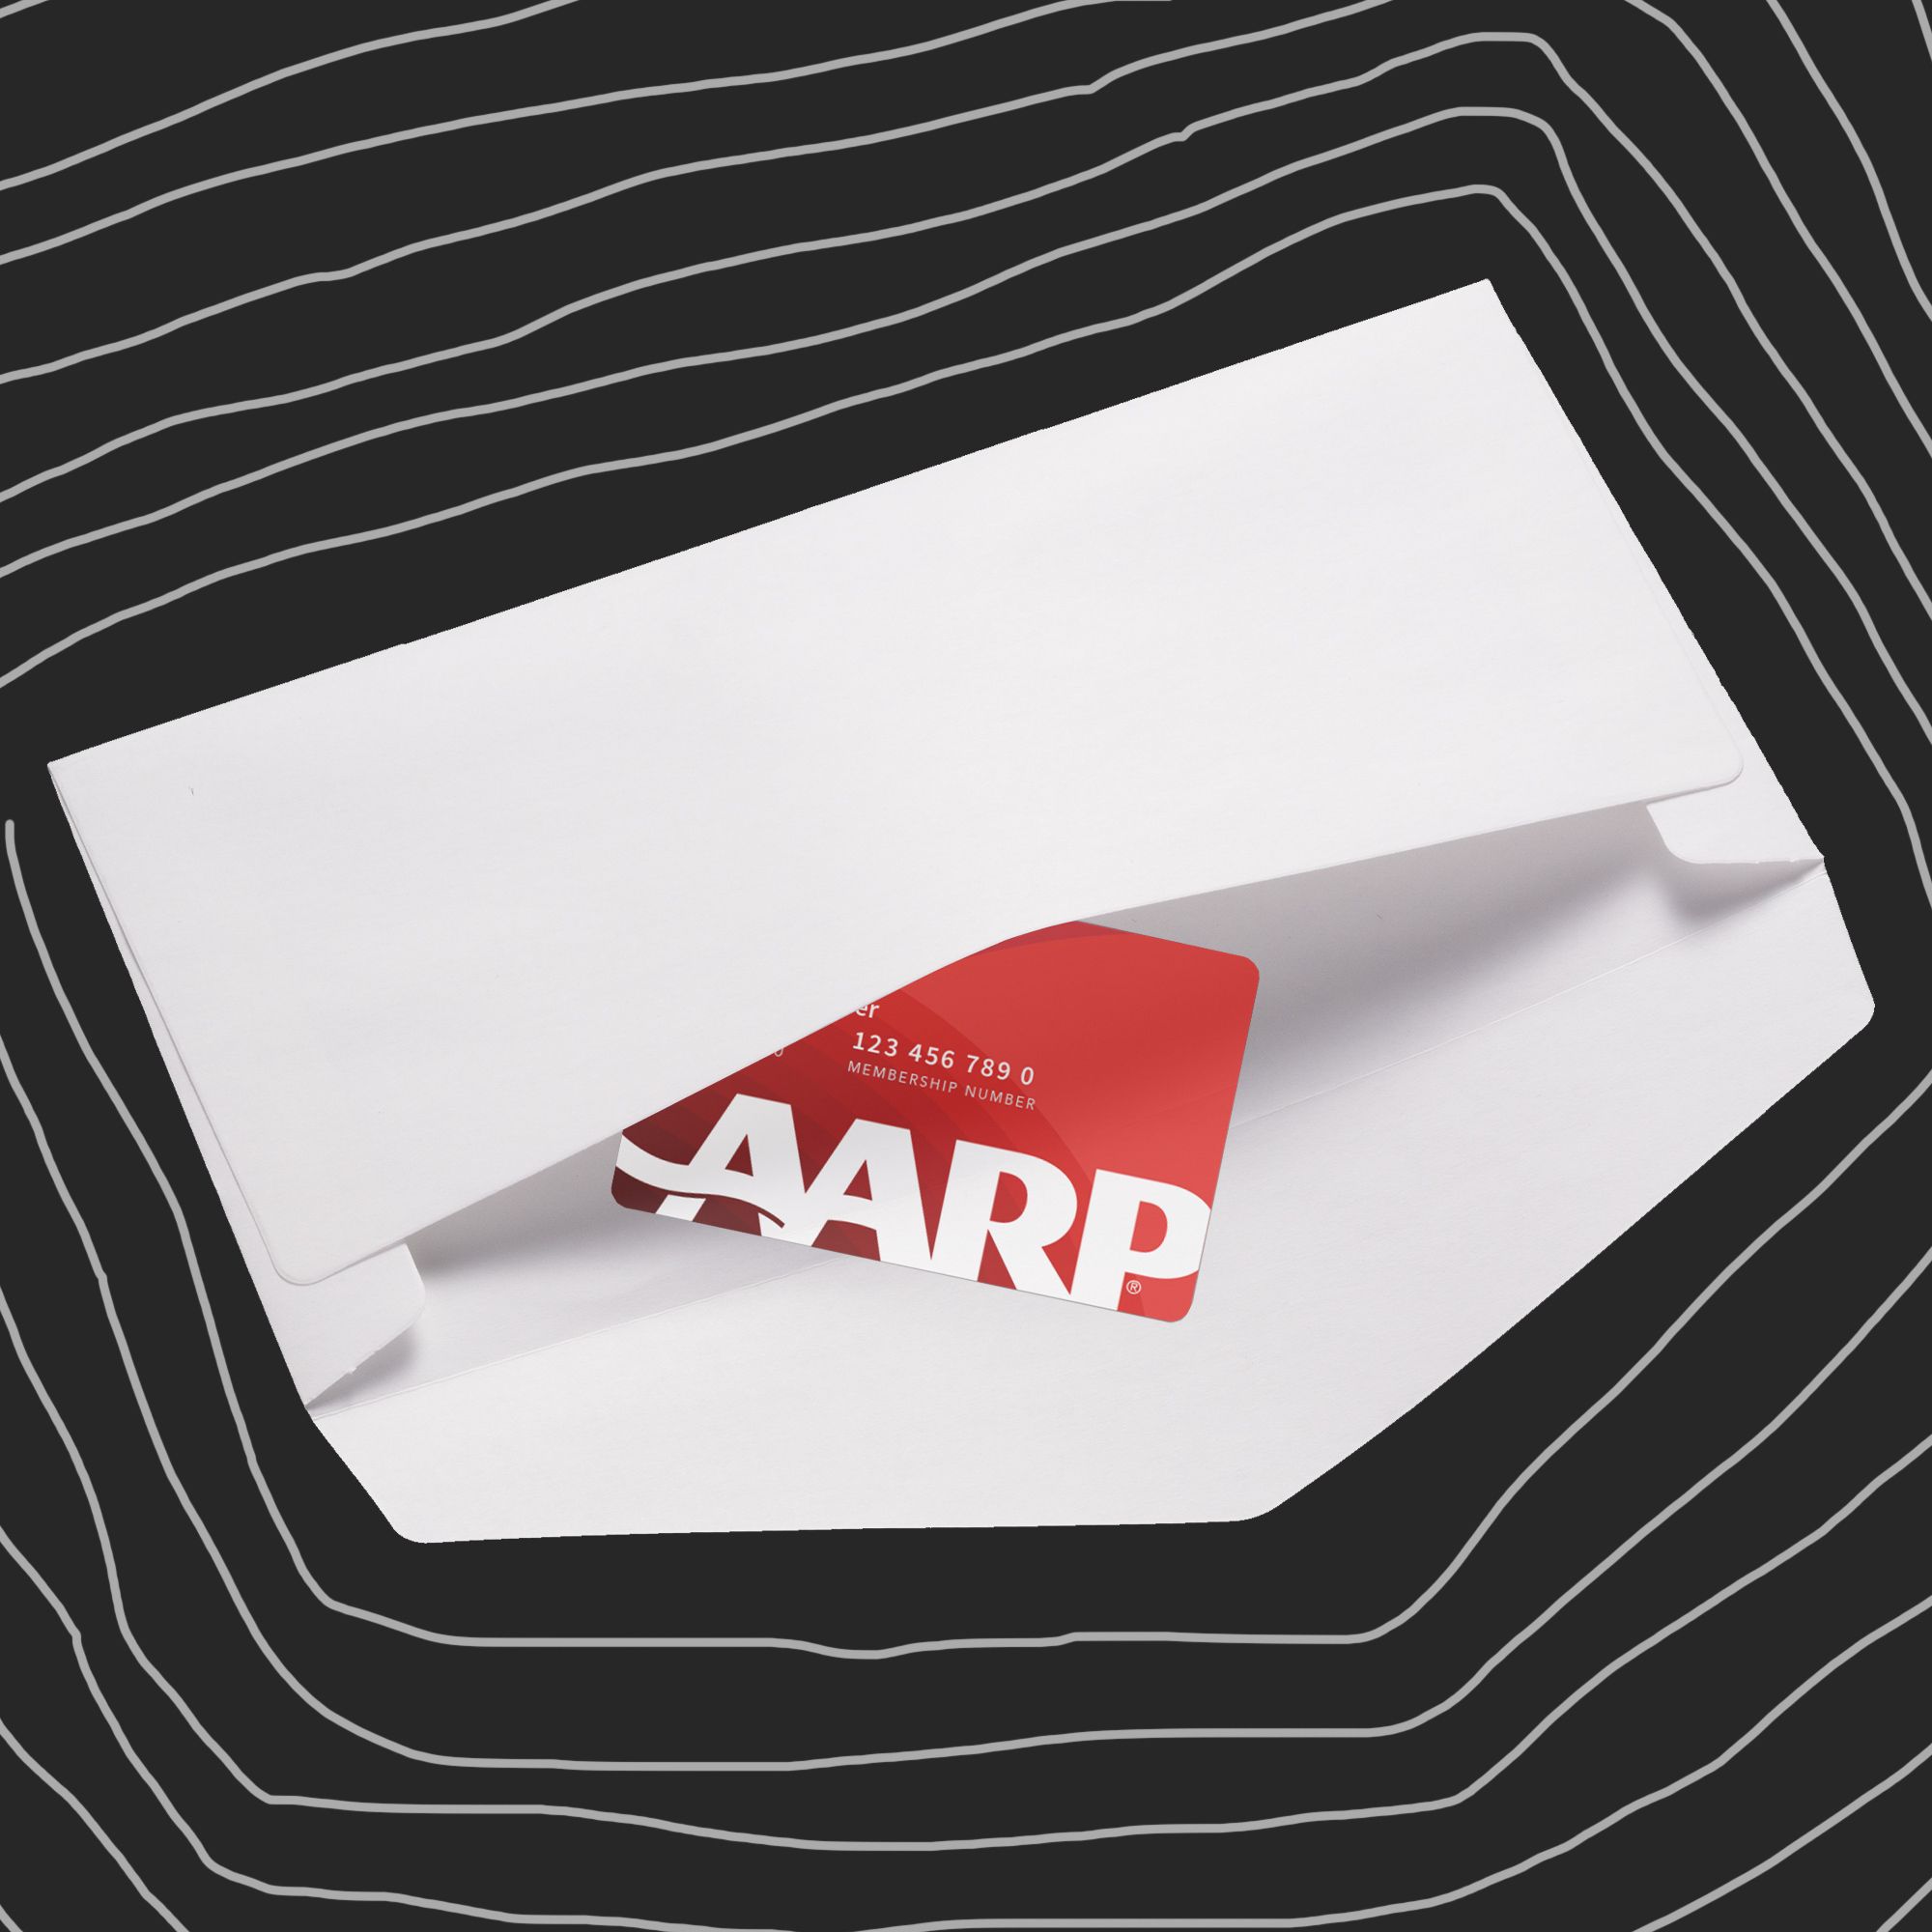 I'm Gen X and I Just Got My AARP Card. This Feels Like a Mistake.